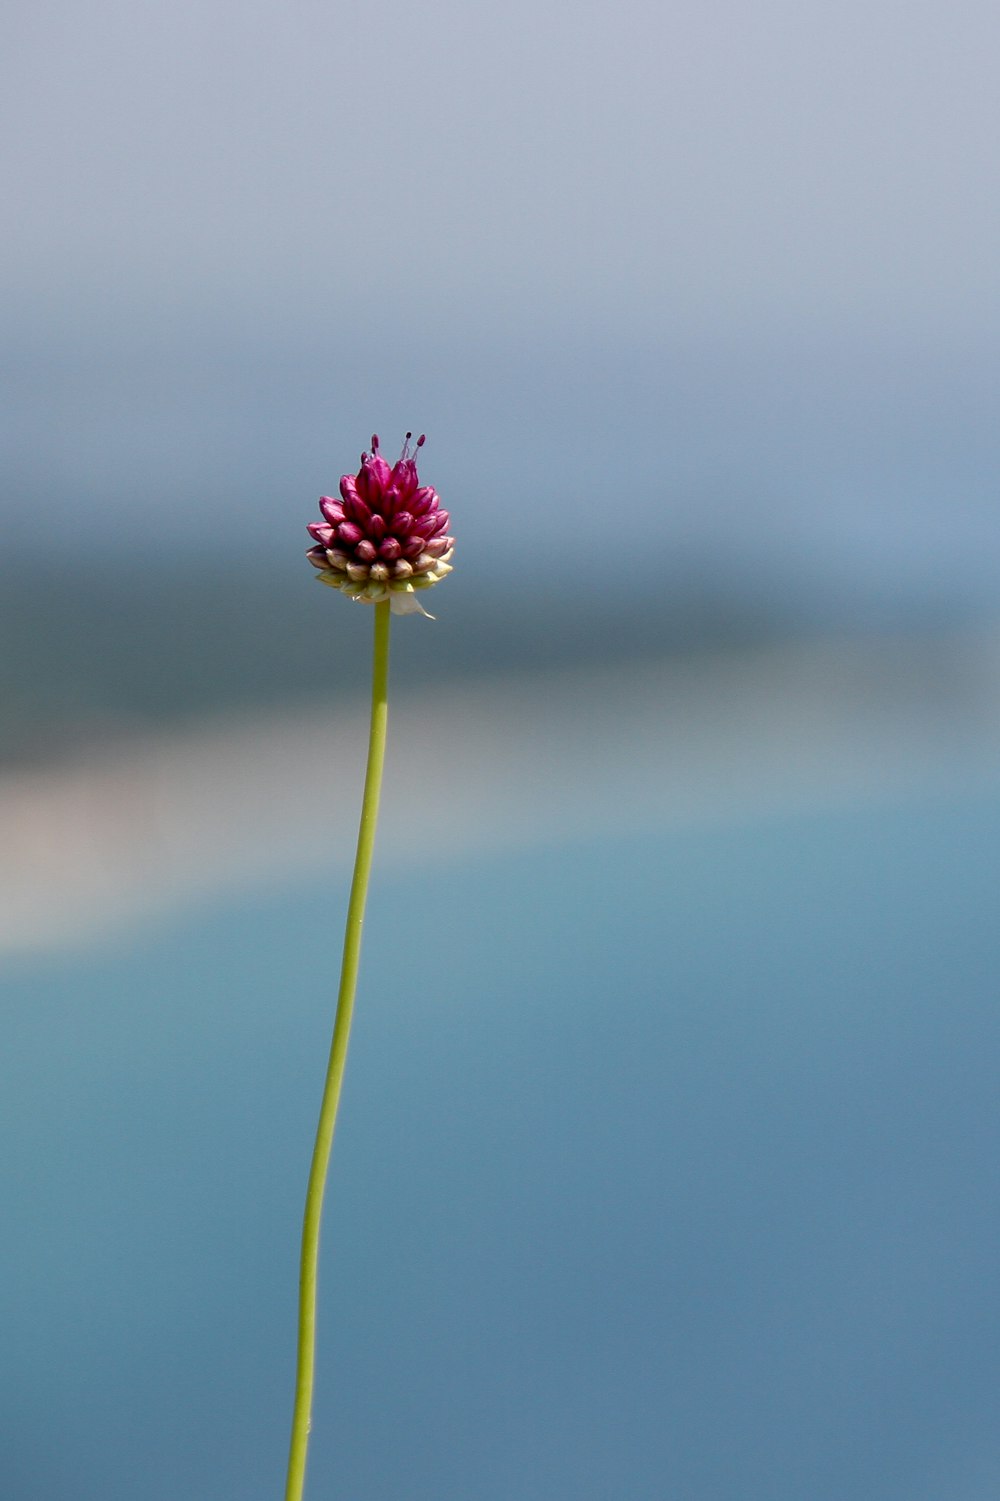 a single flower with a blurry background